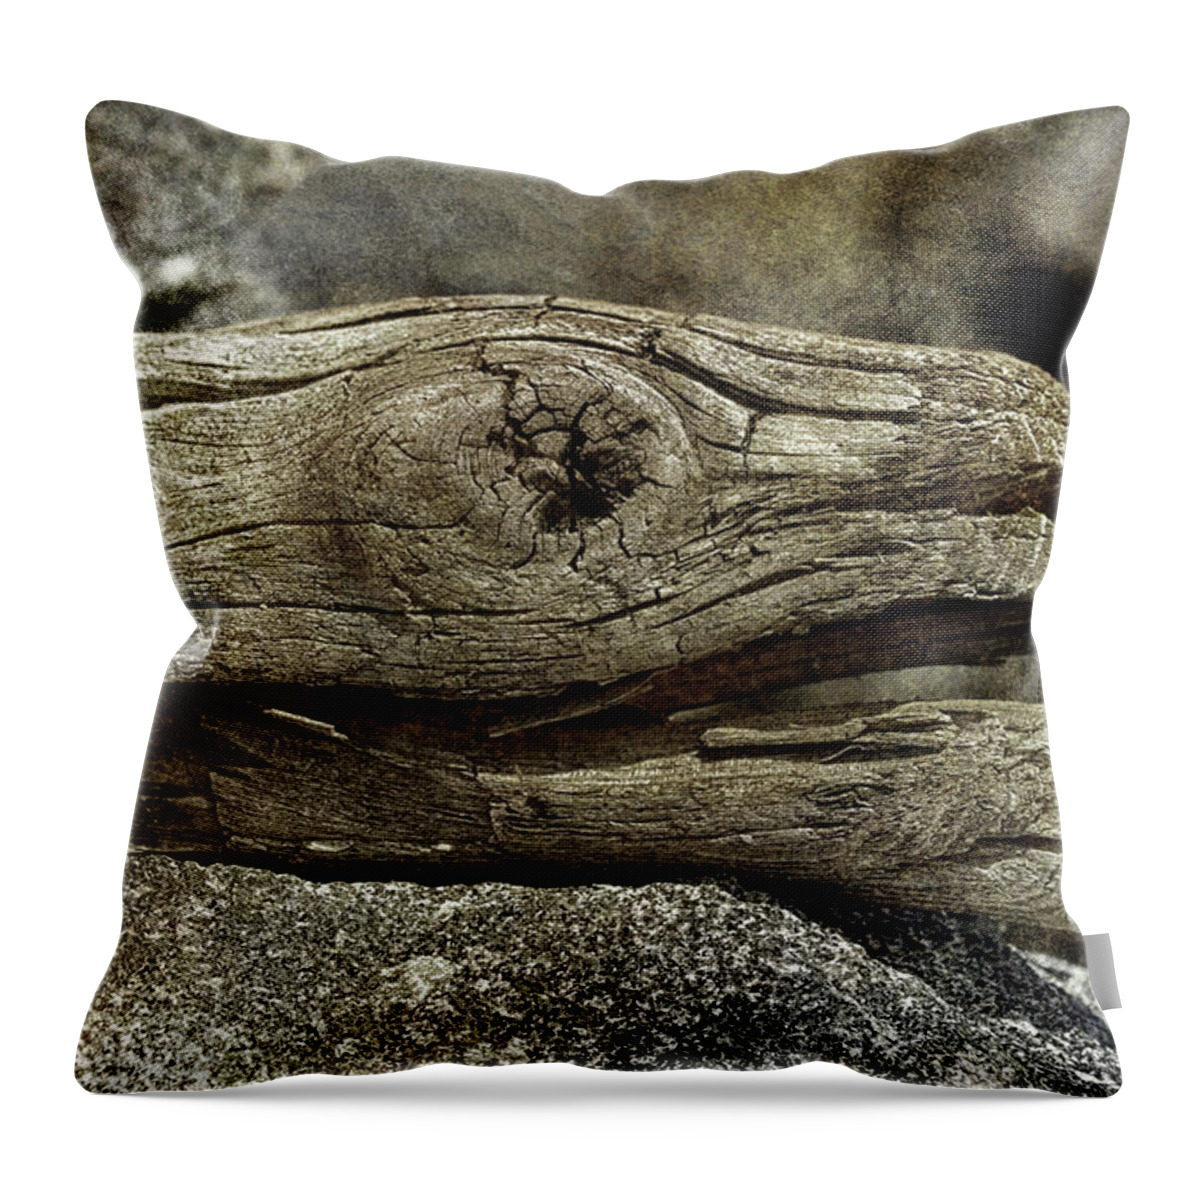 Driftwood Throw Pillow featuring the photograph Jurassic Driftwood by WB Johnston